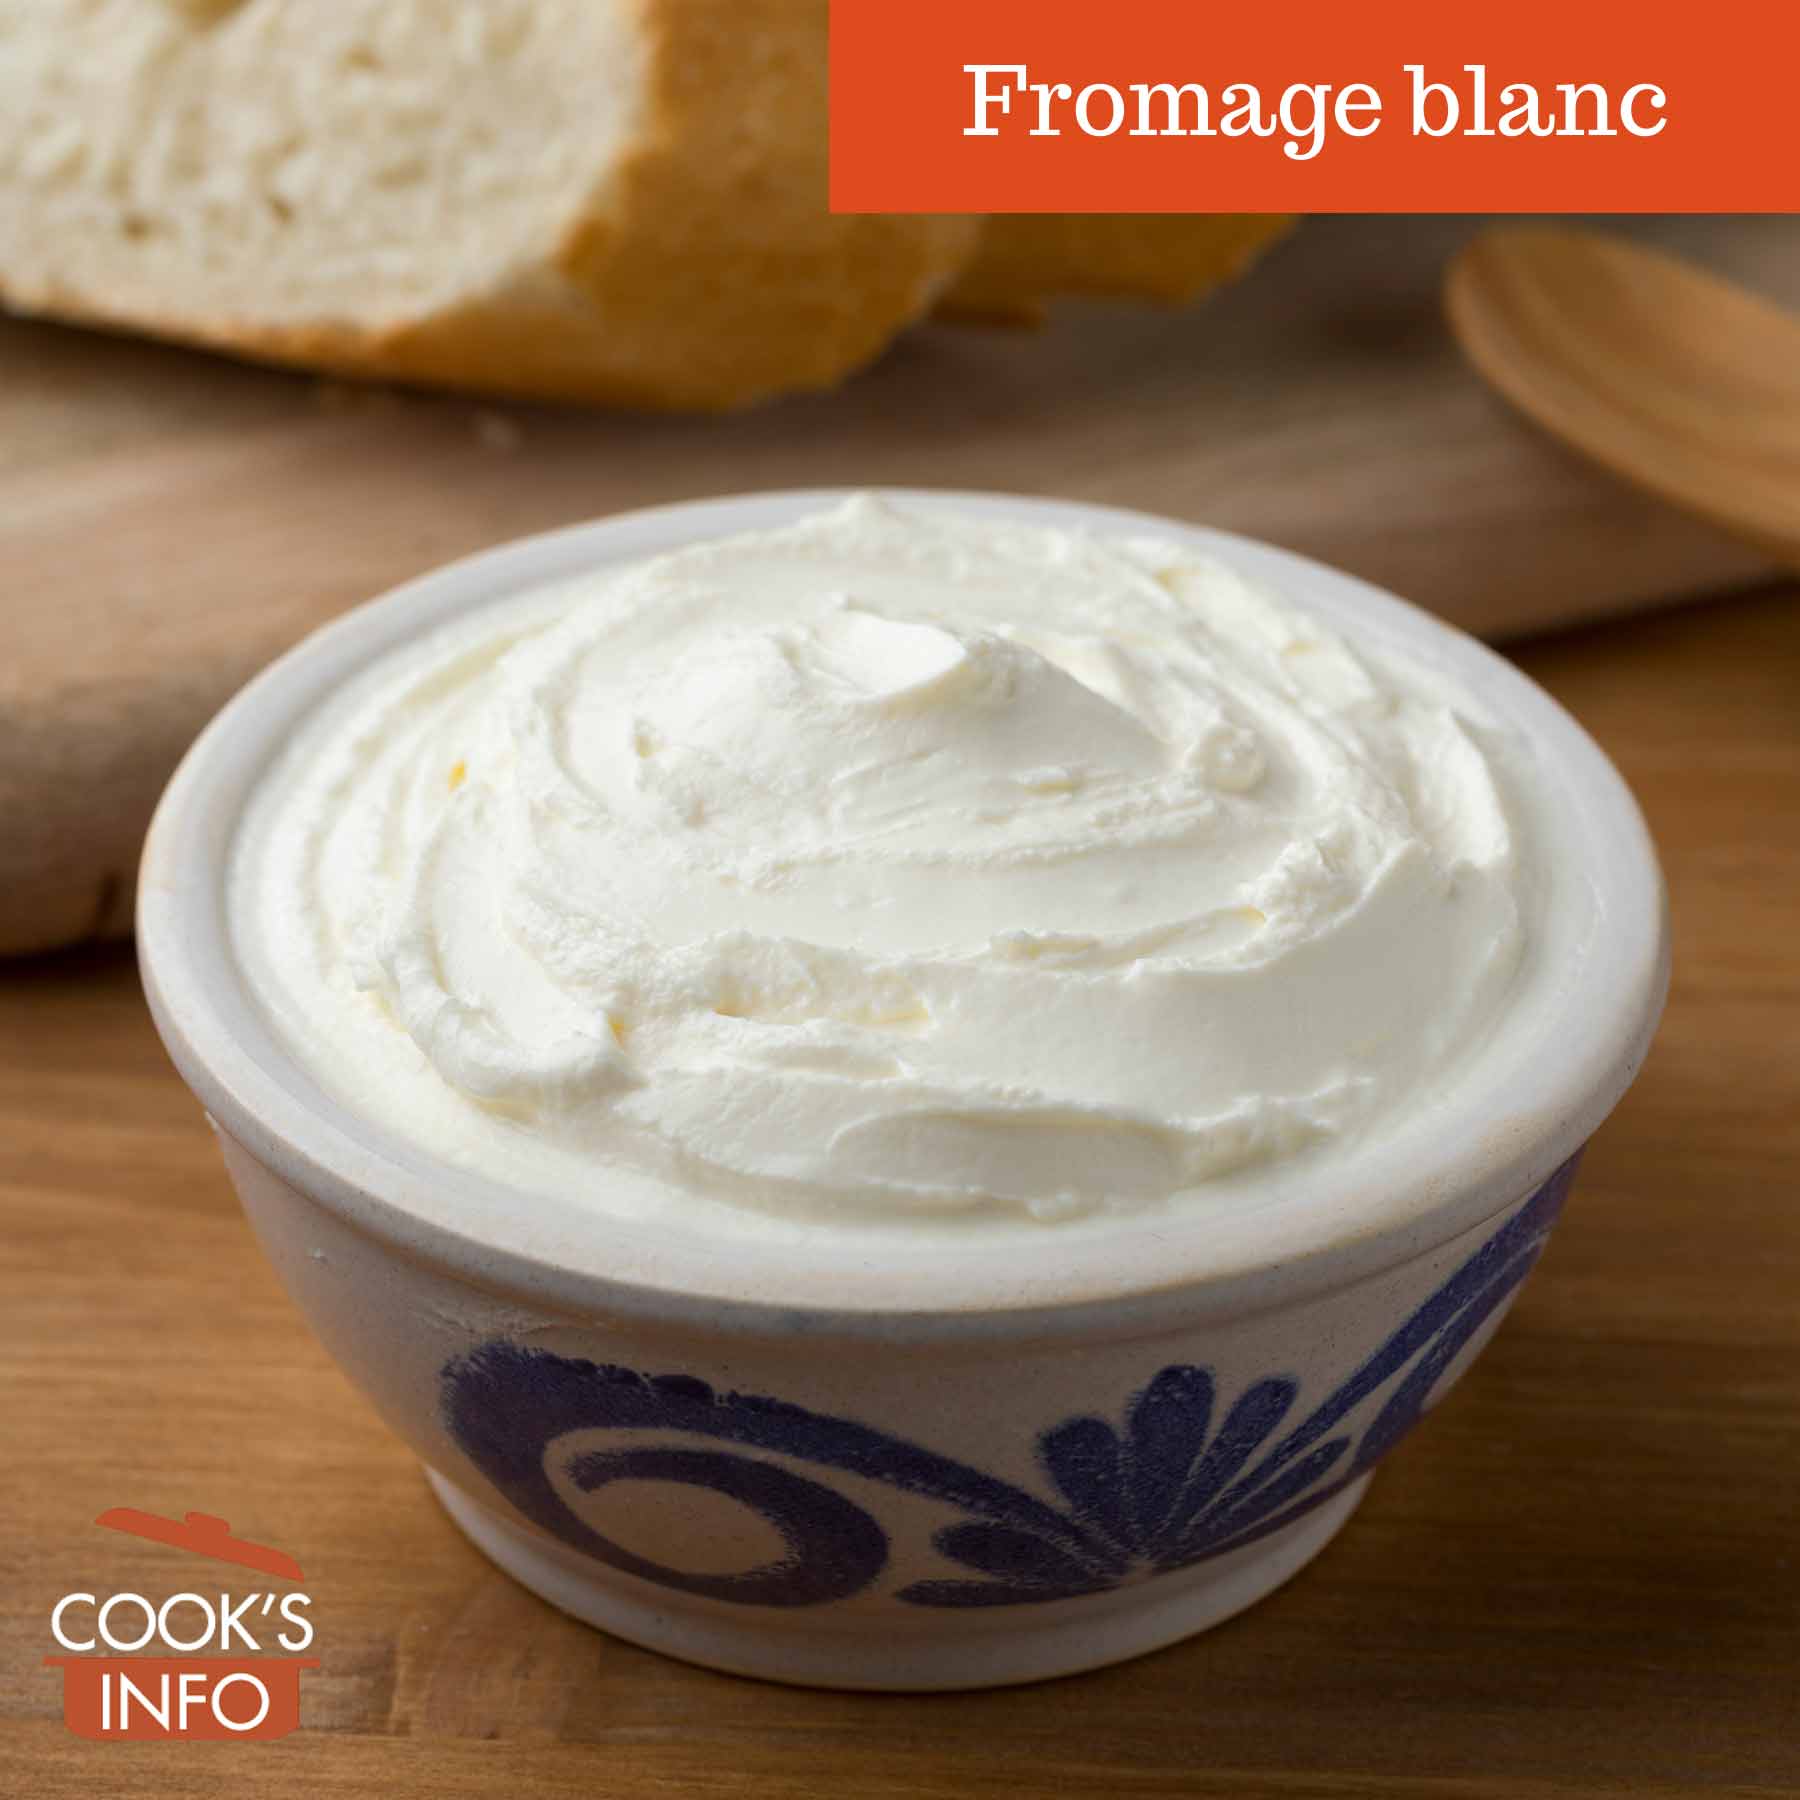 Fromage blanc in tub